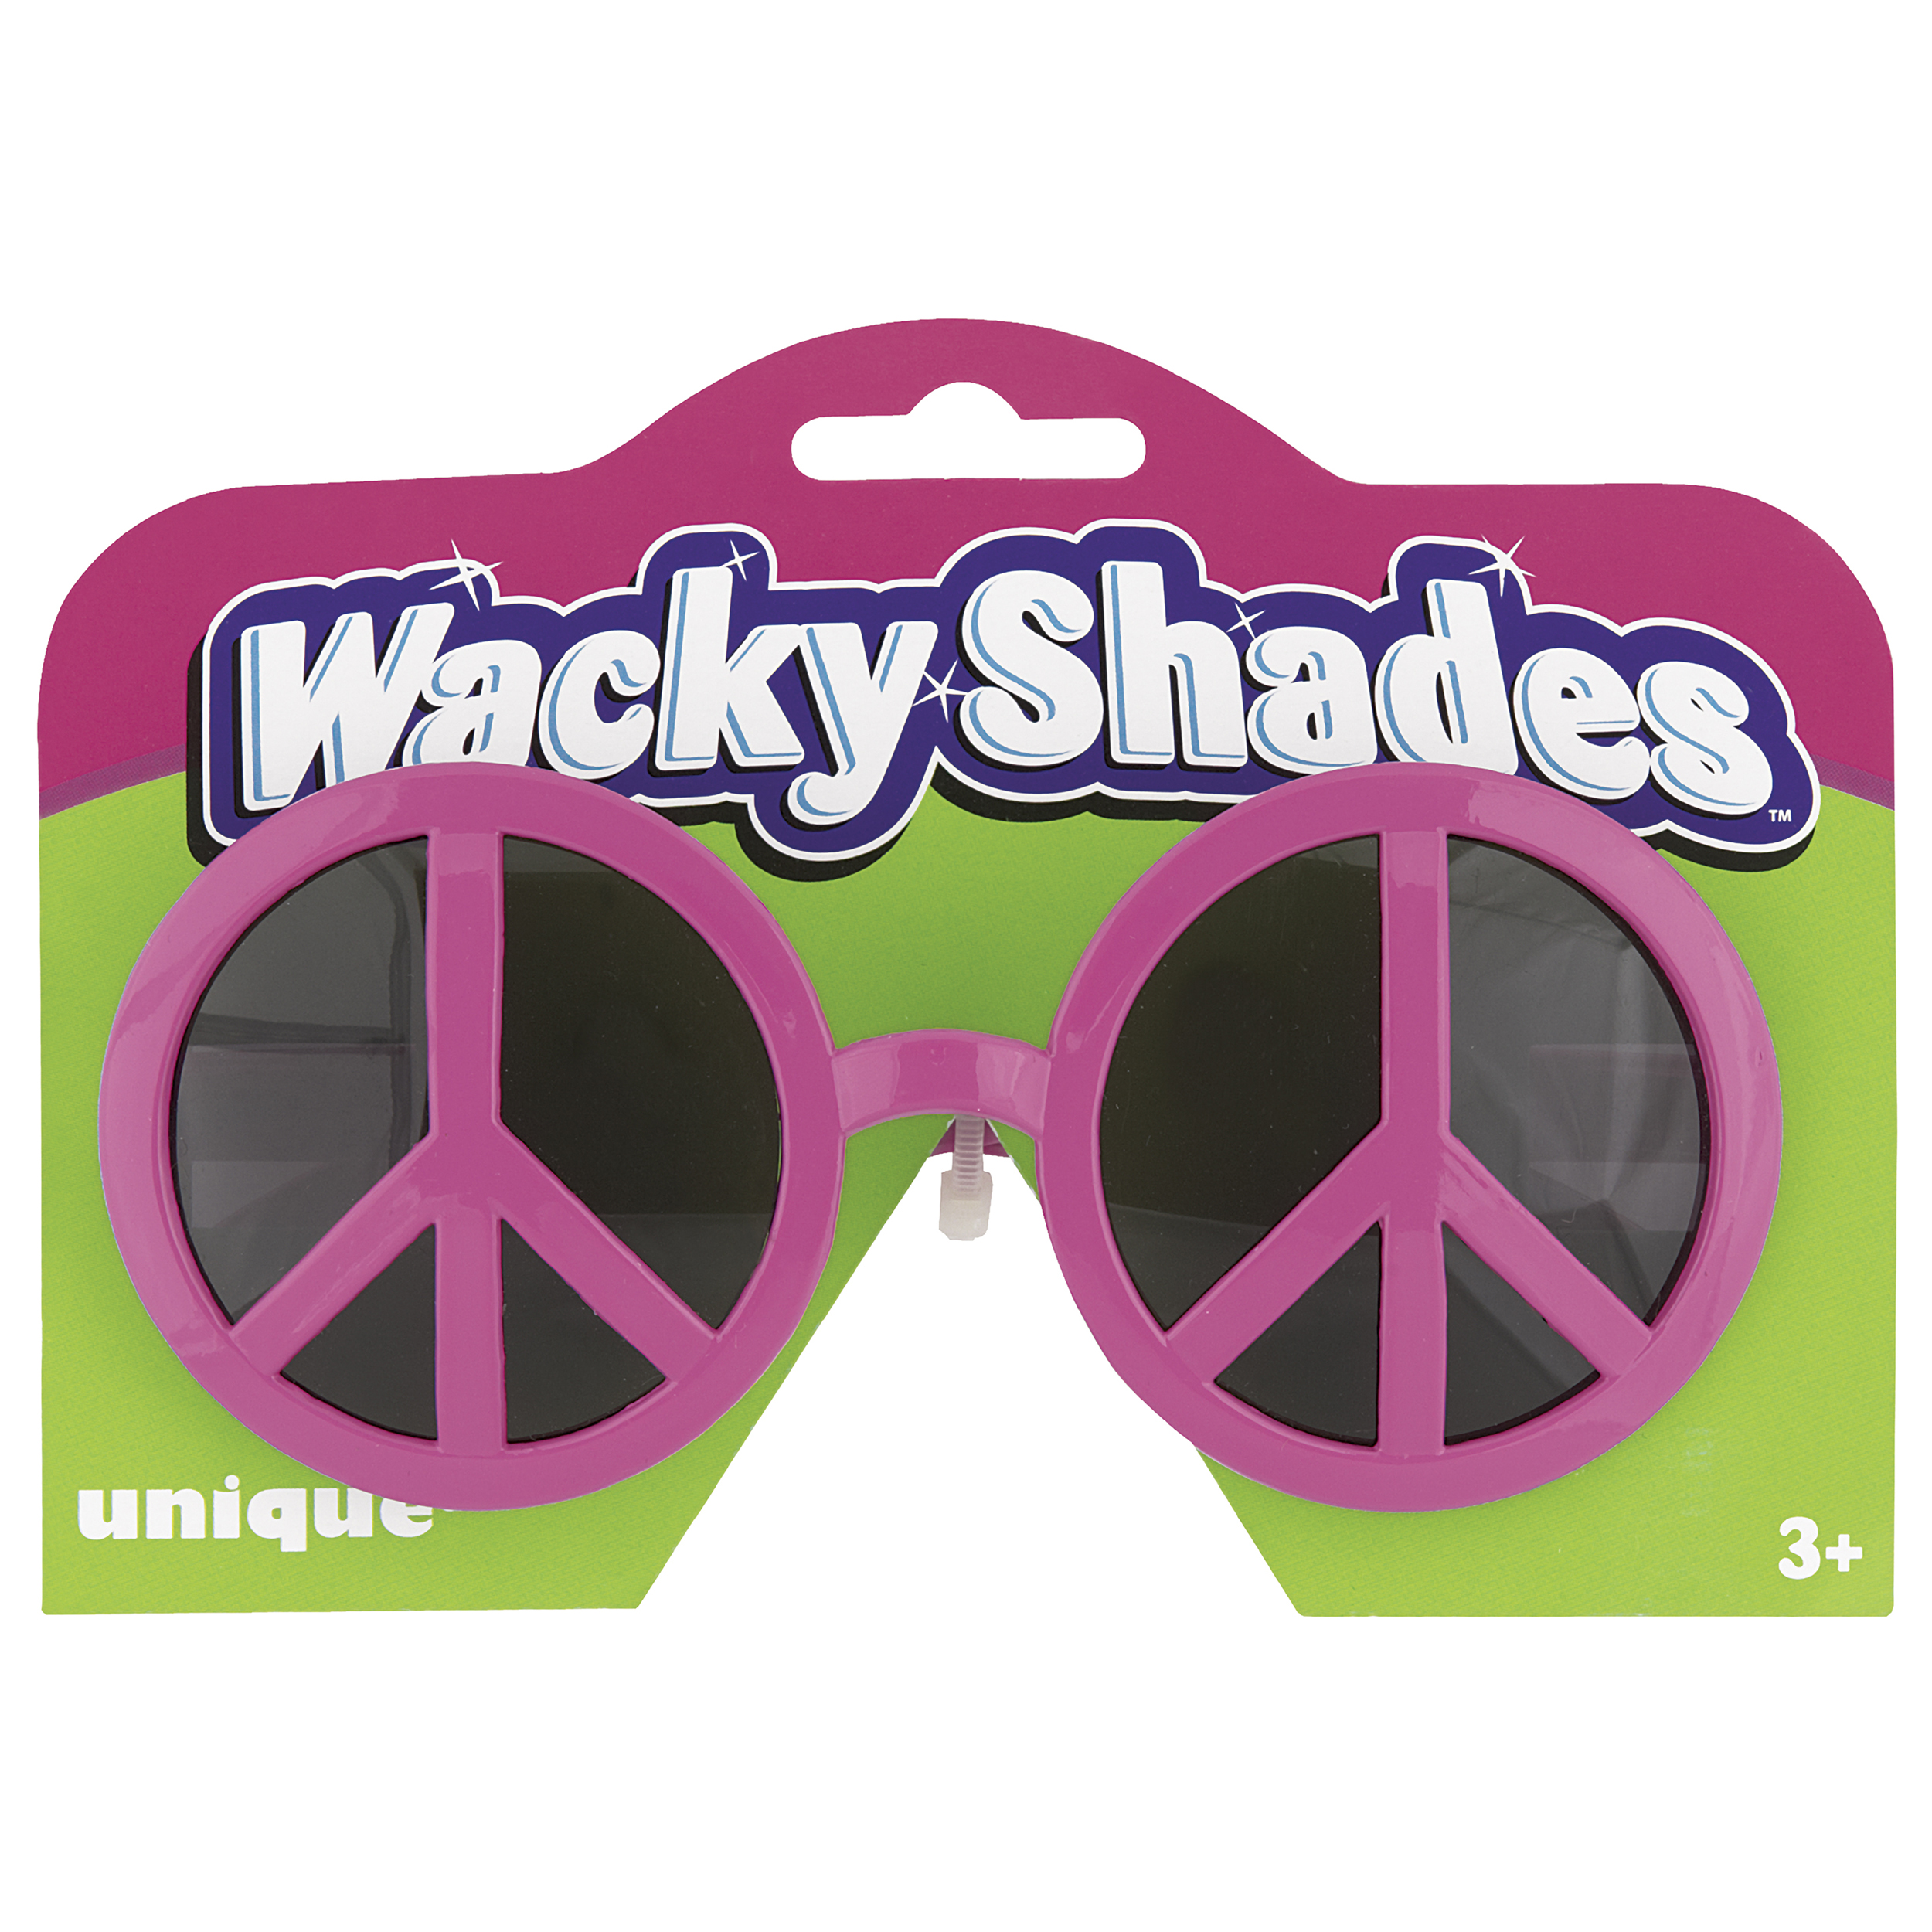 Pink Peace Sign Novelty Glasses - image 1 of 1